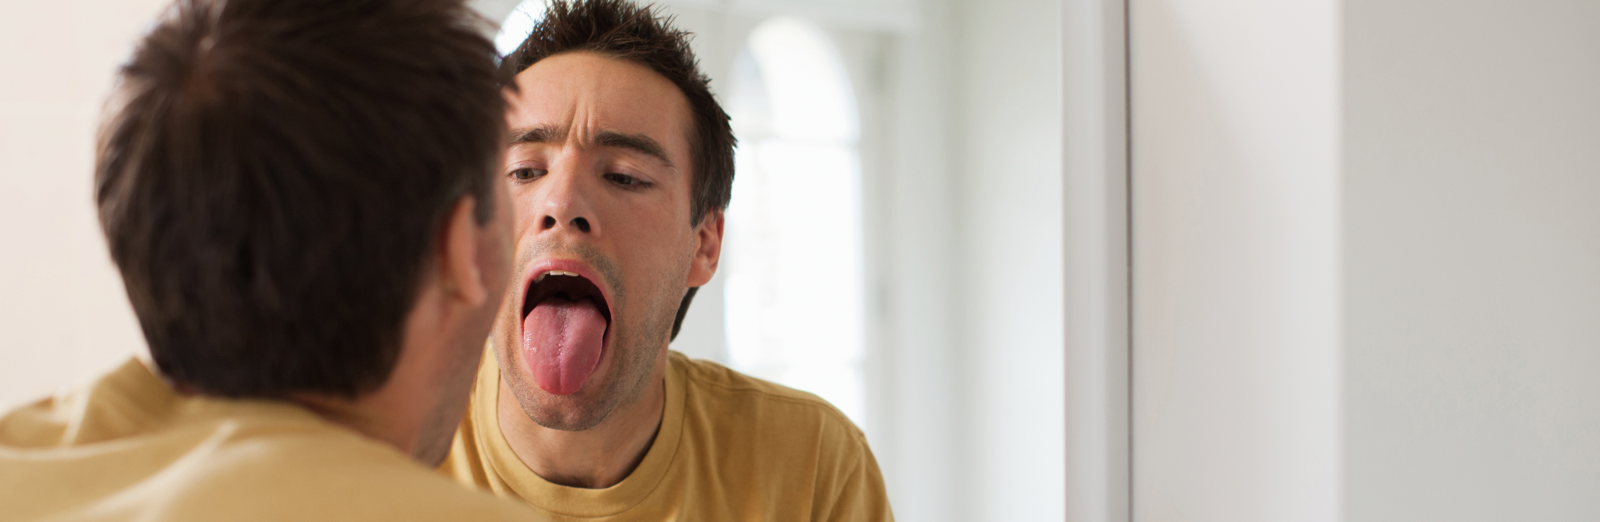 man-with-tongue-out-1600x522.png